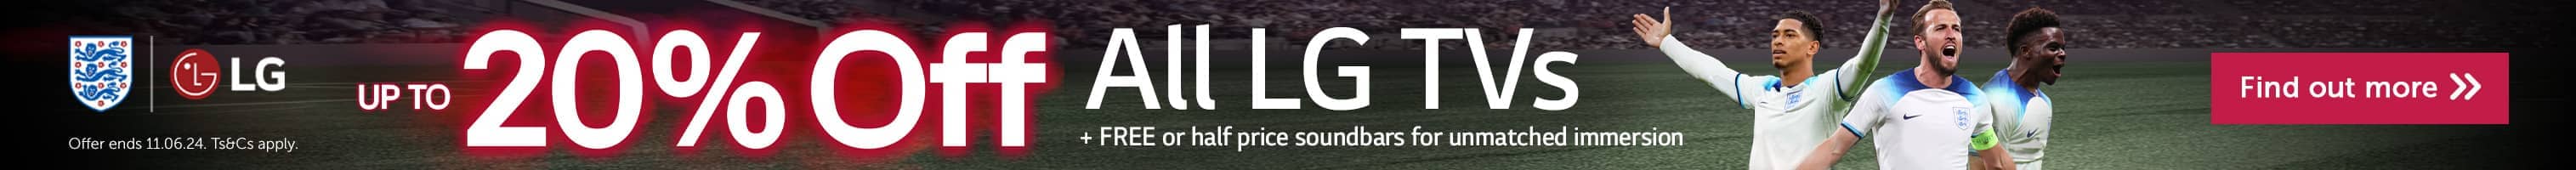 Up to 20% off all LG TVs